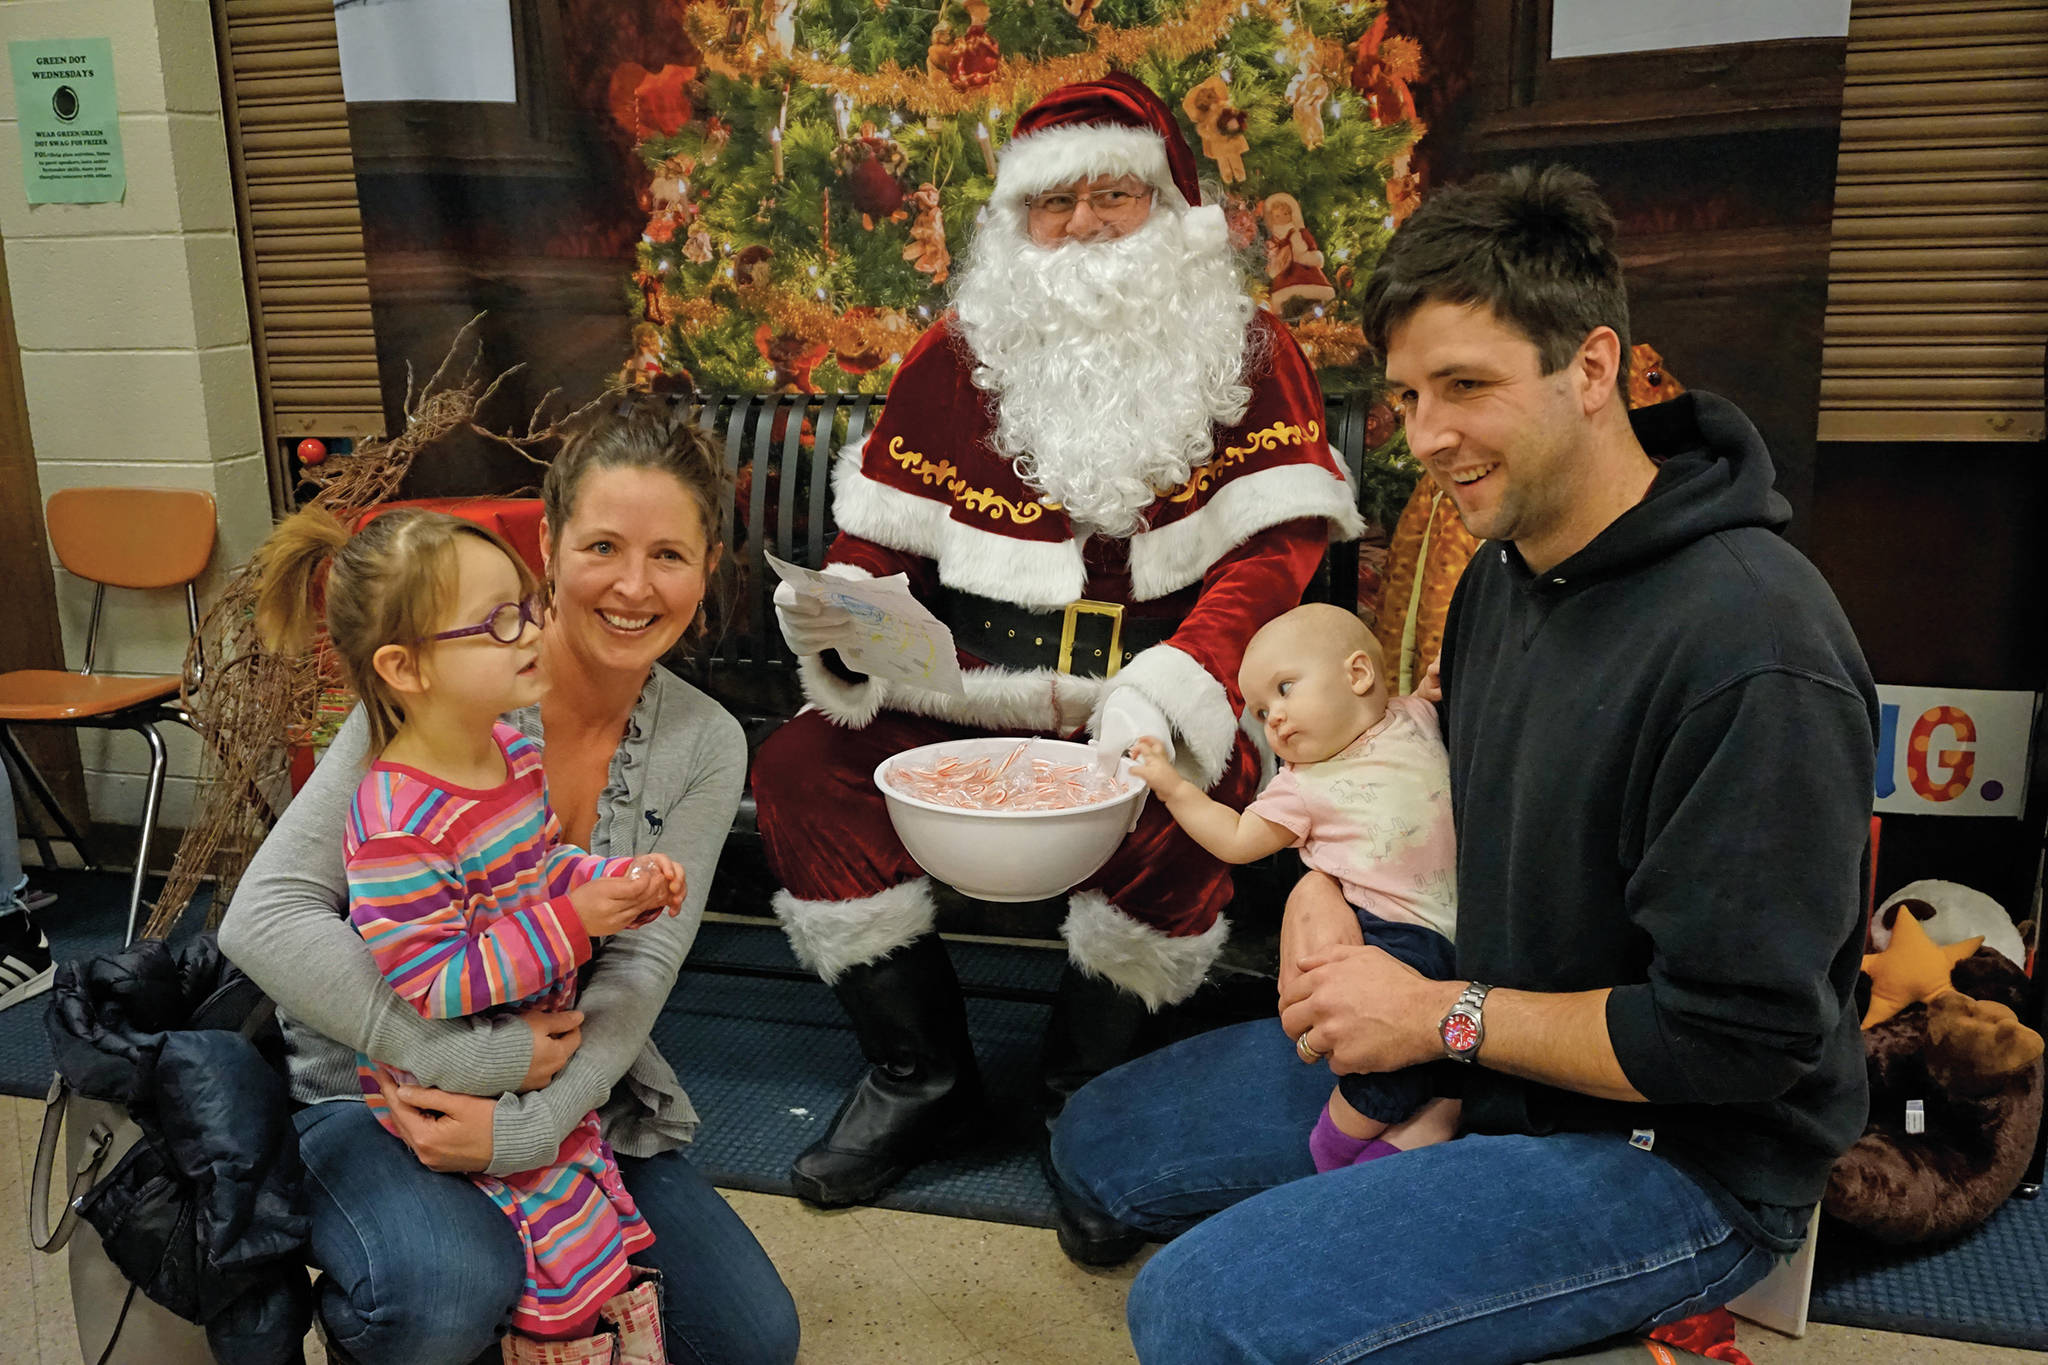 Sydney Jones, left, with her mother, Sarah Bollwitt, visits with Santa Claus on Sunday, Dec. 8, 2019, at the Homer Nutcracker Faire at Homer High School in Homer, Alaska. Sydney’s father, Morgan Jones, right, and sister, Jenaka, watch. Sydney had her mother write a letter to Santa Claus for her. (Photo by Michael Armstrong/Homer News)